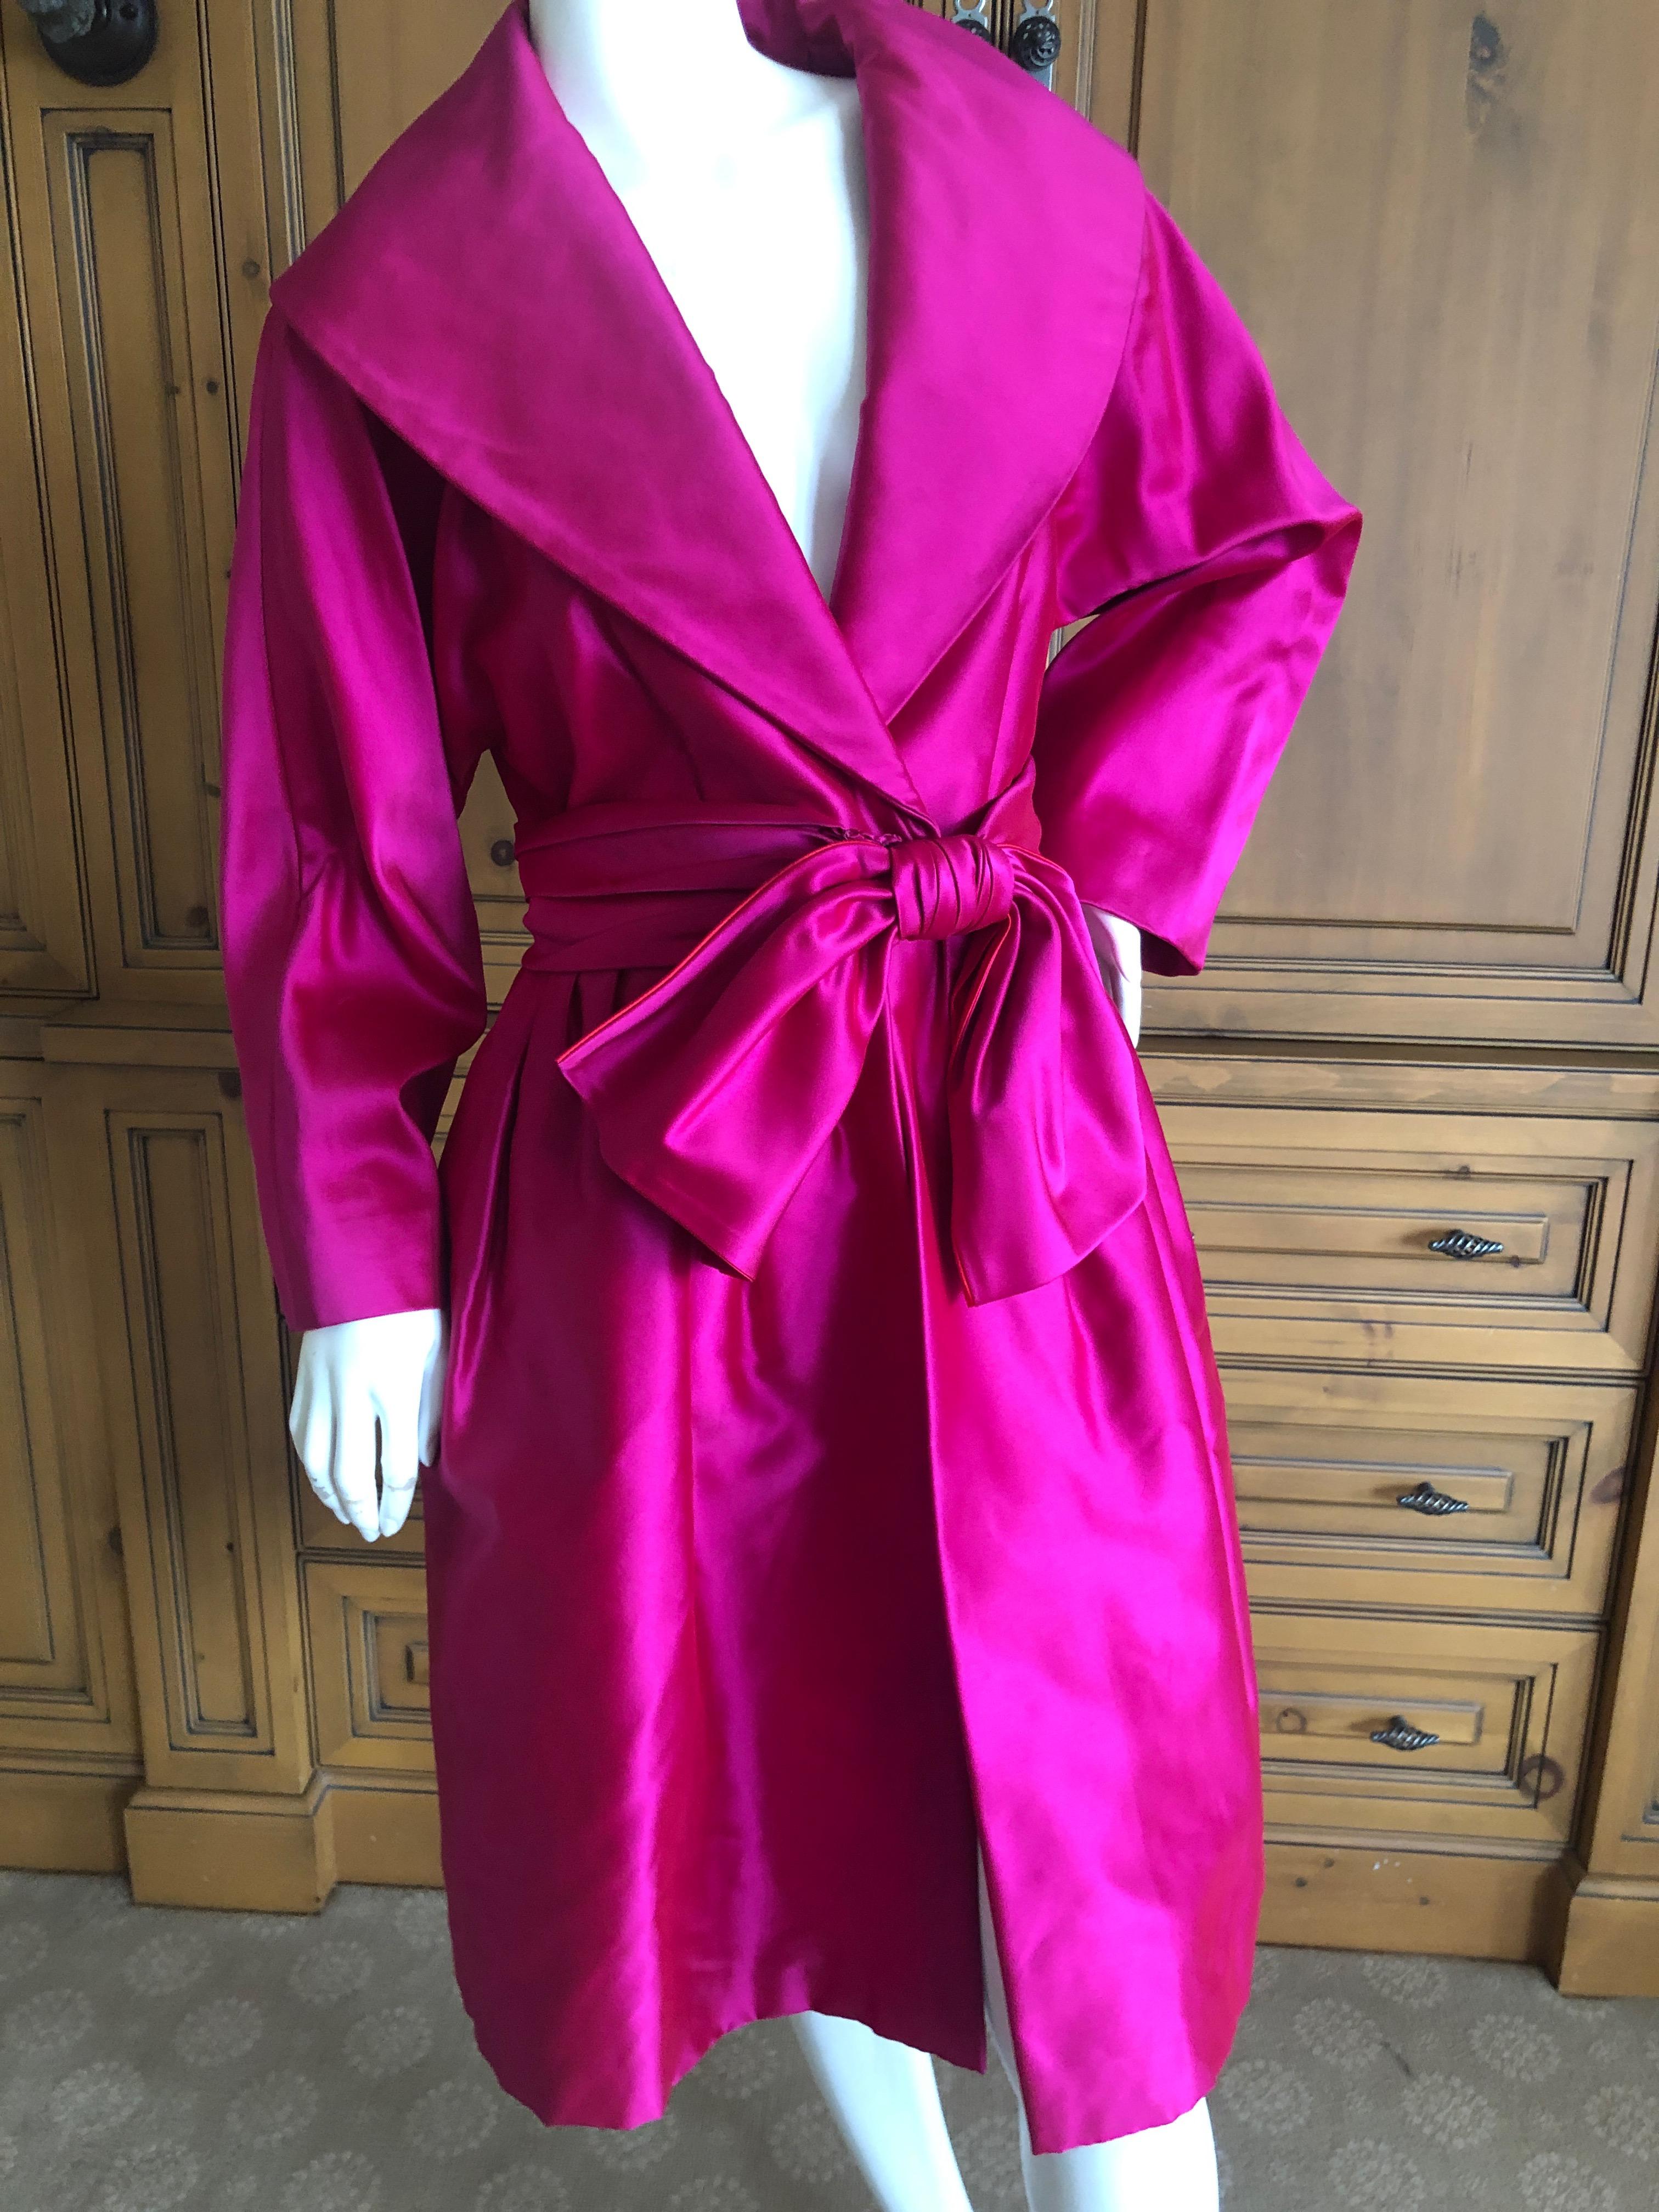 Carolyne Roehm  for Bergdorf Goodman 1980's Fuchsia Silk Faille Opera Coat or Dress with Belt.
Carolyne Roehm was Oscar de la Renta's assistant before marrying extremely well and starting her own luxury label in the eighties.
Sold at Bergdorf